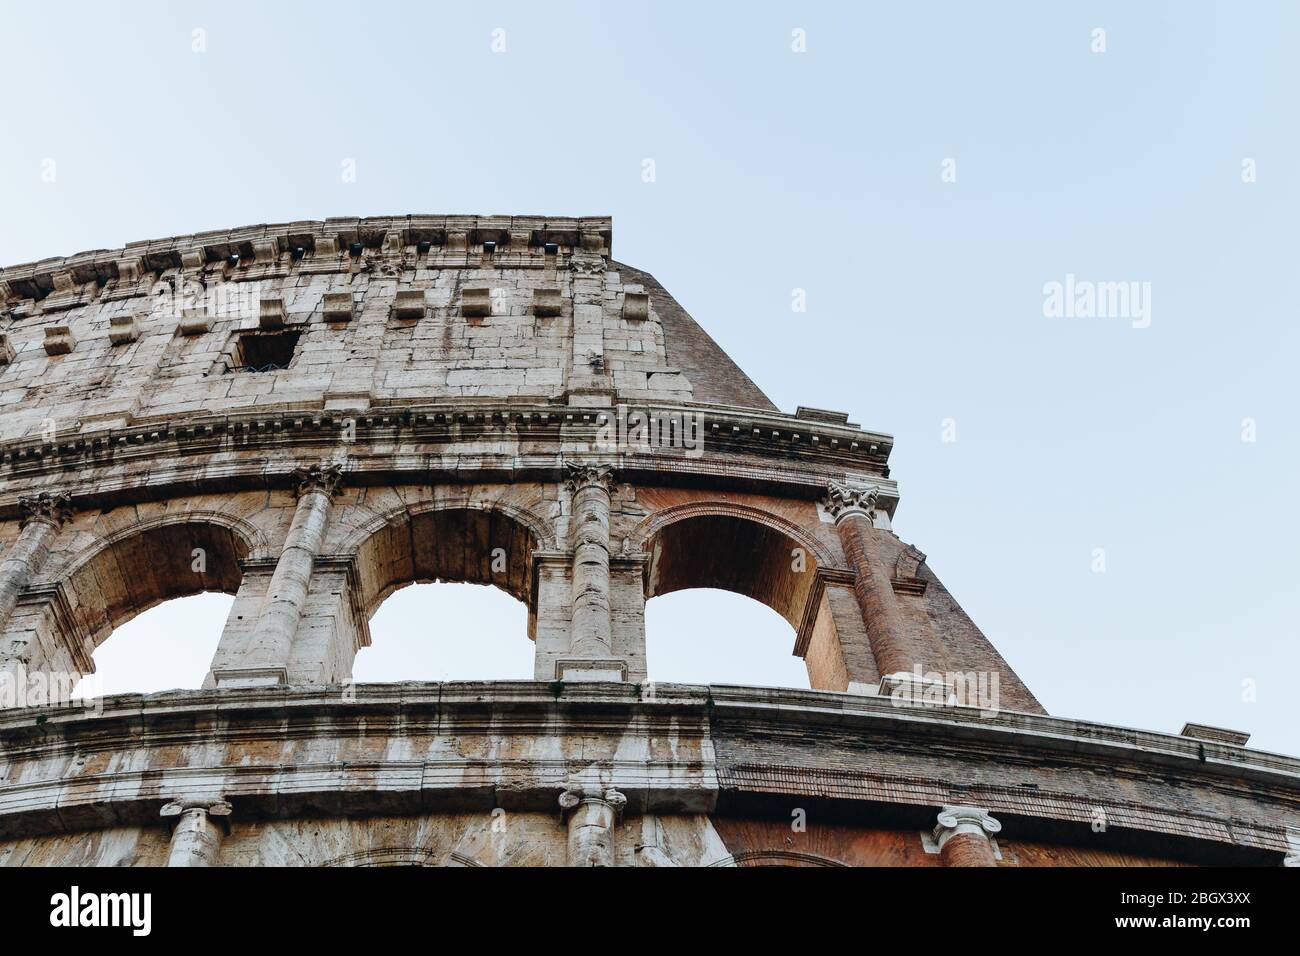 The Colosseum in the morning light. Rome, Italy Stock Photo